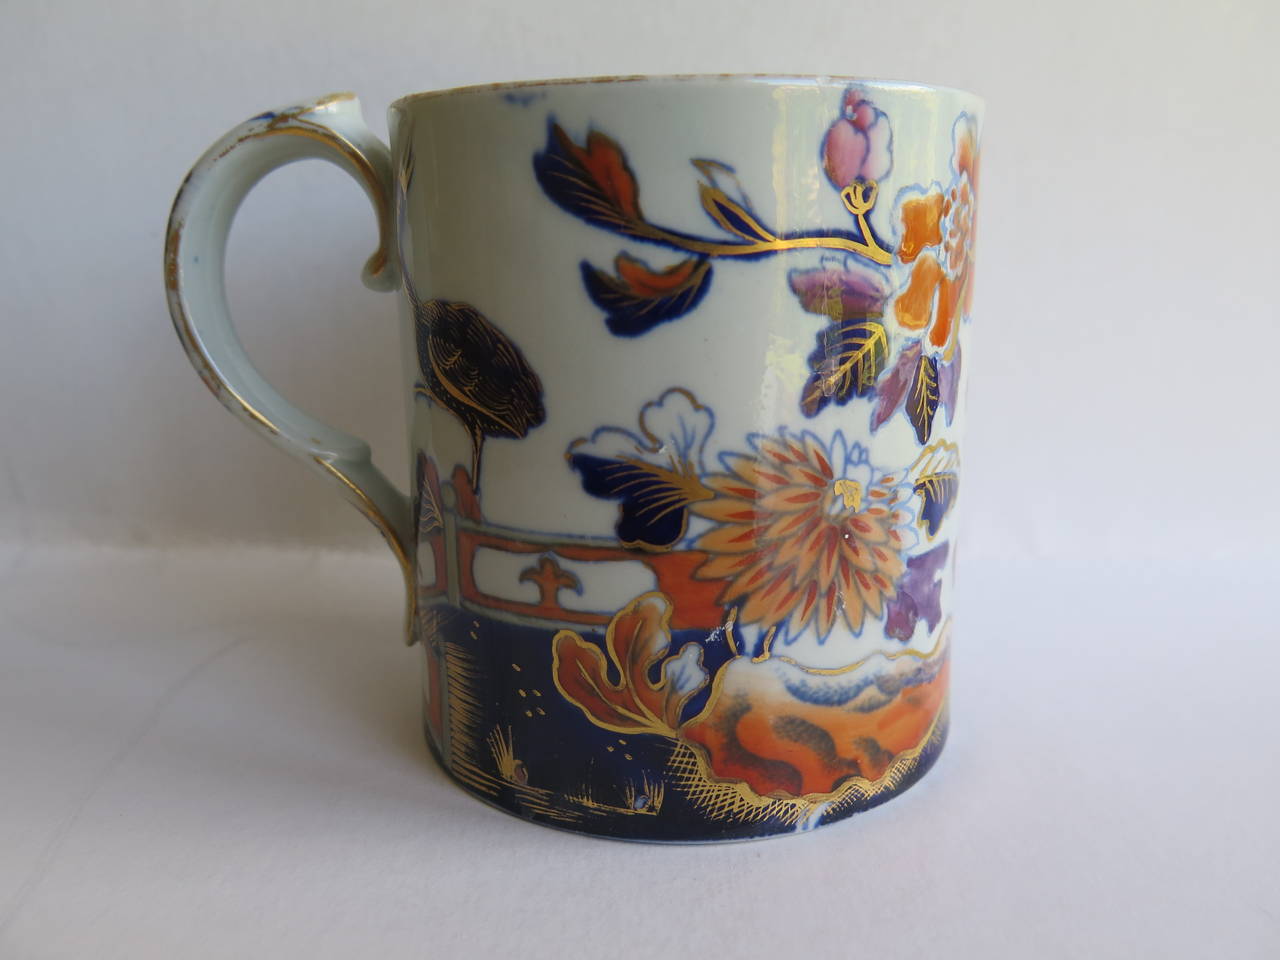 This is a rare and early Stone China  (Ironstone) MUG which dates to the George 111 period, c.1815. made by the DAVENPORT factory of Longport, Staffordshire Potteries, England.

The mug is straight sided similar to a coffee can and has a loop